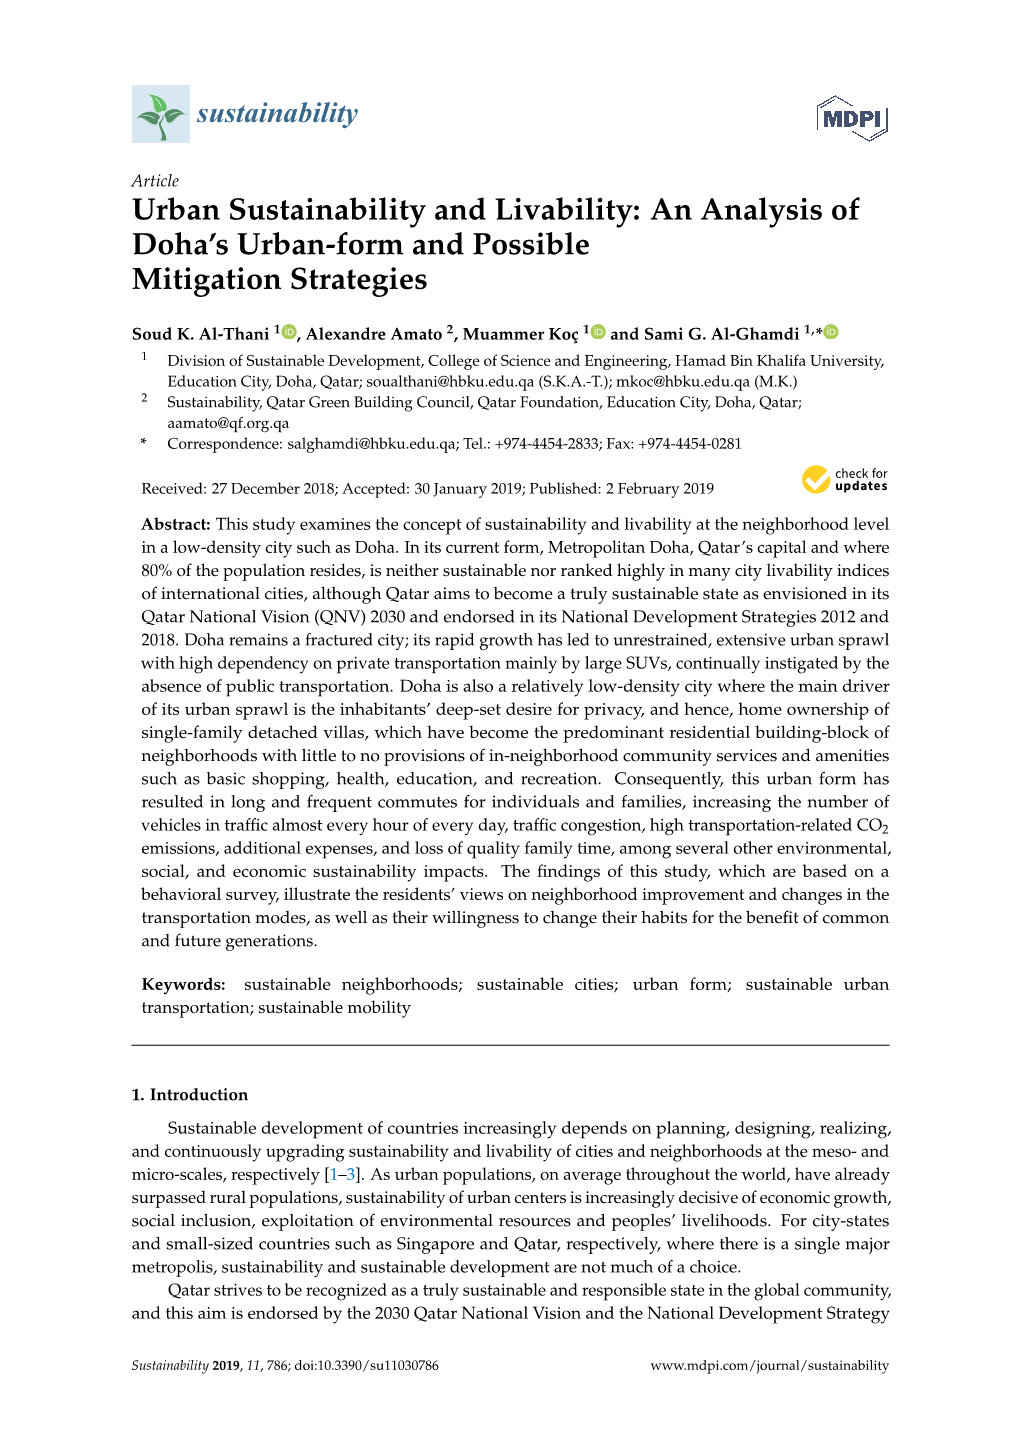 Urban Sustainability and Livability: an Analysis of Doha’S Urban-Form and Possible Mitigation Strategies